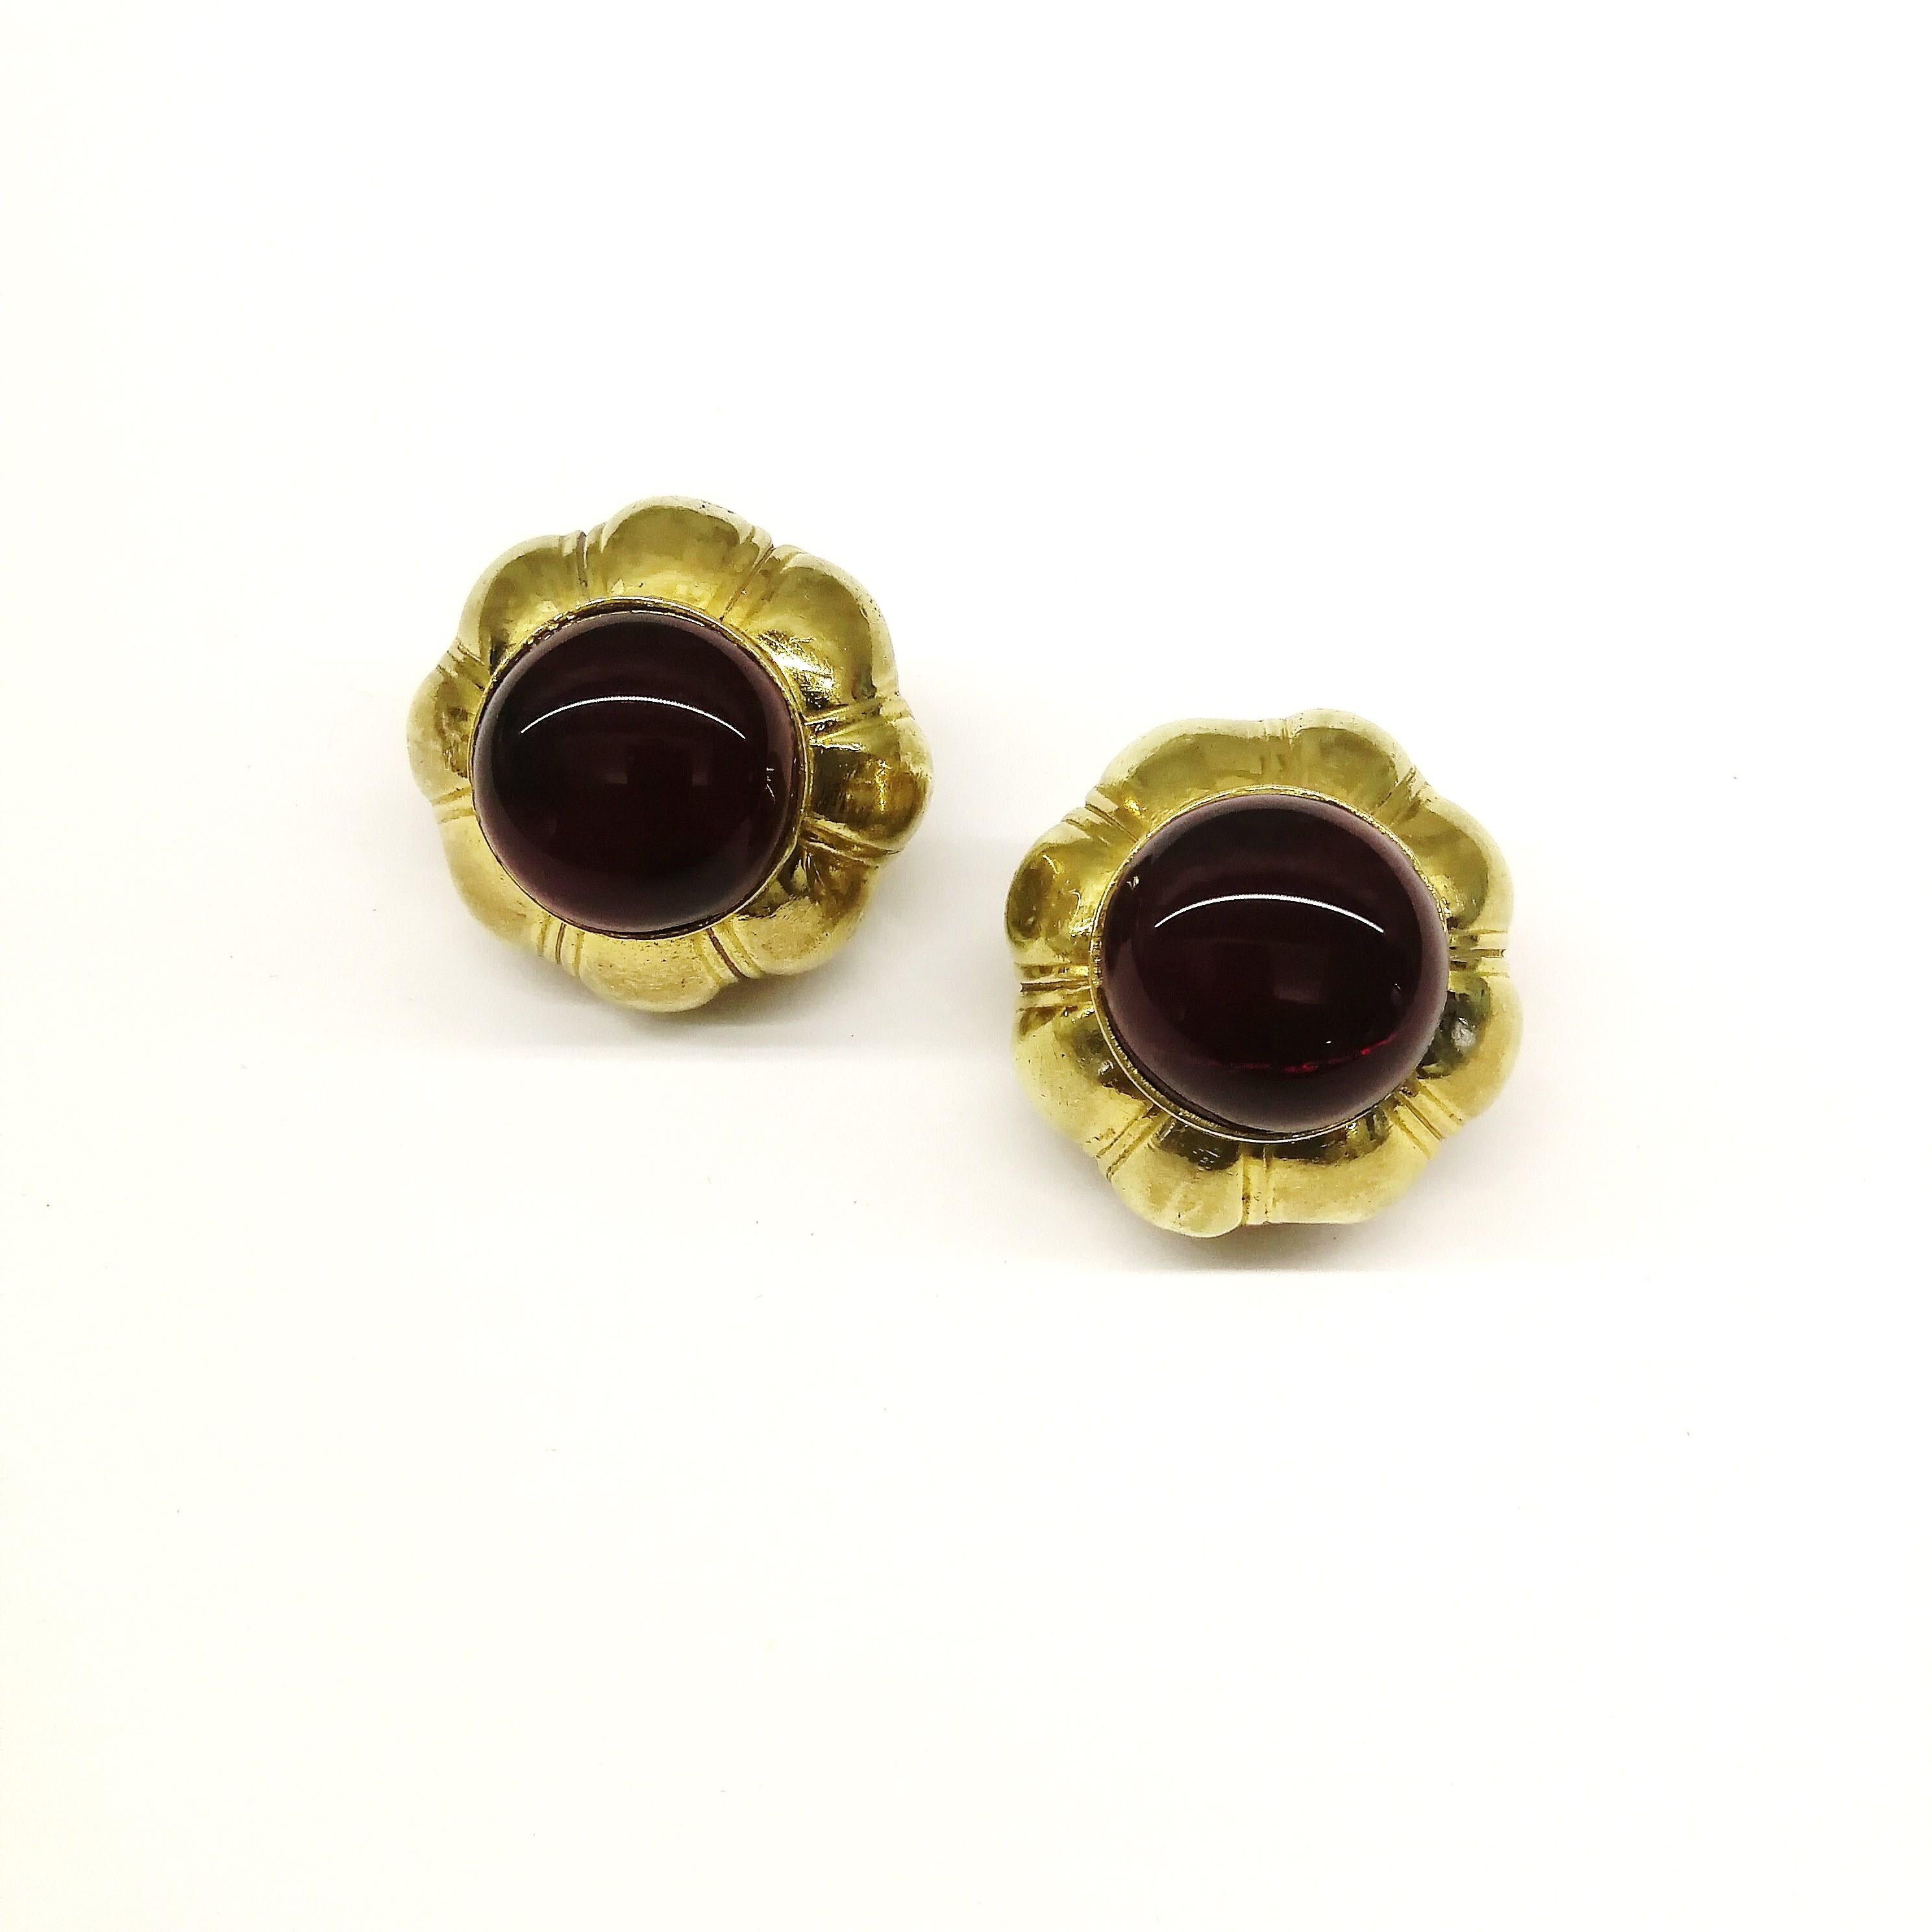 Classic and highly wearable, these beautiful early Chanel ruby poured glass and gilt earrings, made by Maison Goossens, Chanel's celebrated collaborator and facilitator, radiate inherent style and quality for any wearer or collector.
Not much needs